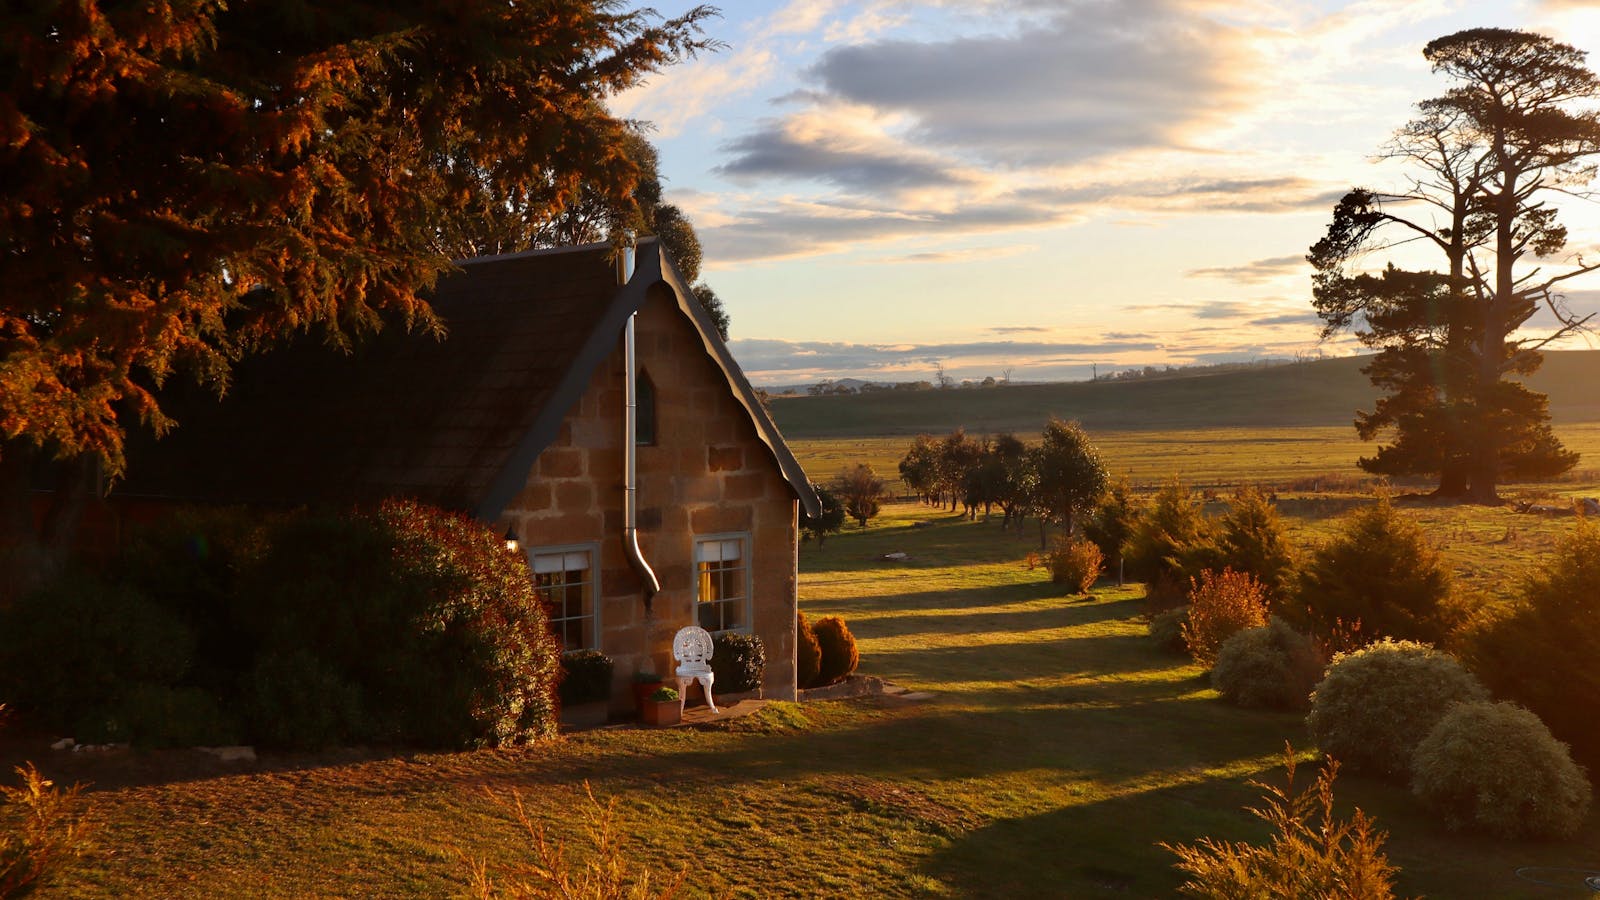 Shepherd's Rest is a private and self contained cottage with sweeping views towards Table Mountain